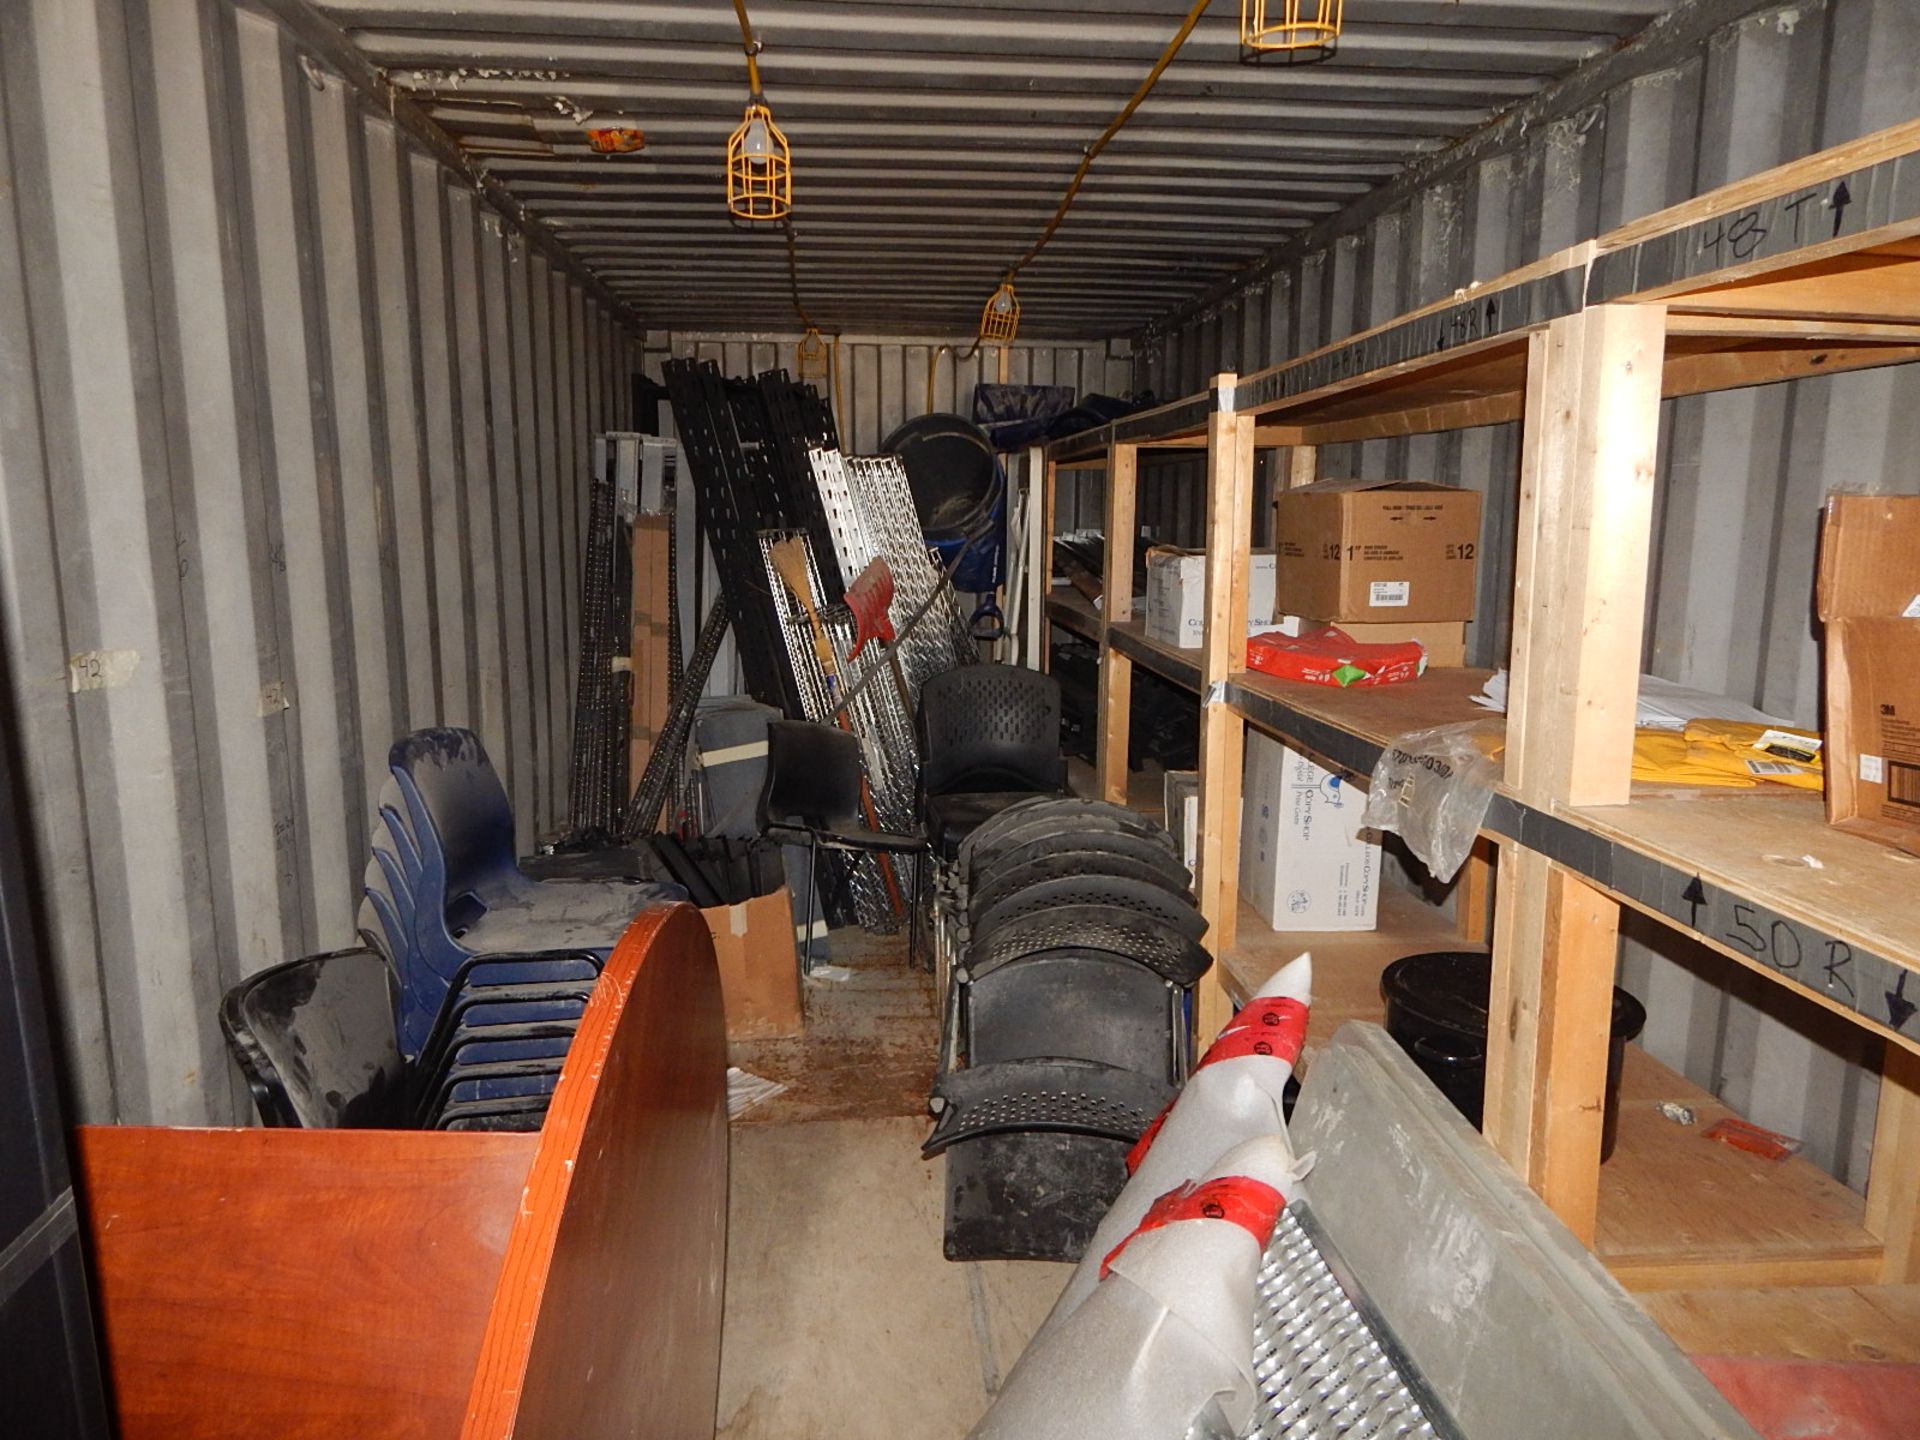 LOT/ CONTENTS OF CONTAINER CONSISTING OF FURNITURE, HARDWARE, CABINET, AND ADJUSTABLE RACKING - Image 7 of 8